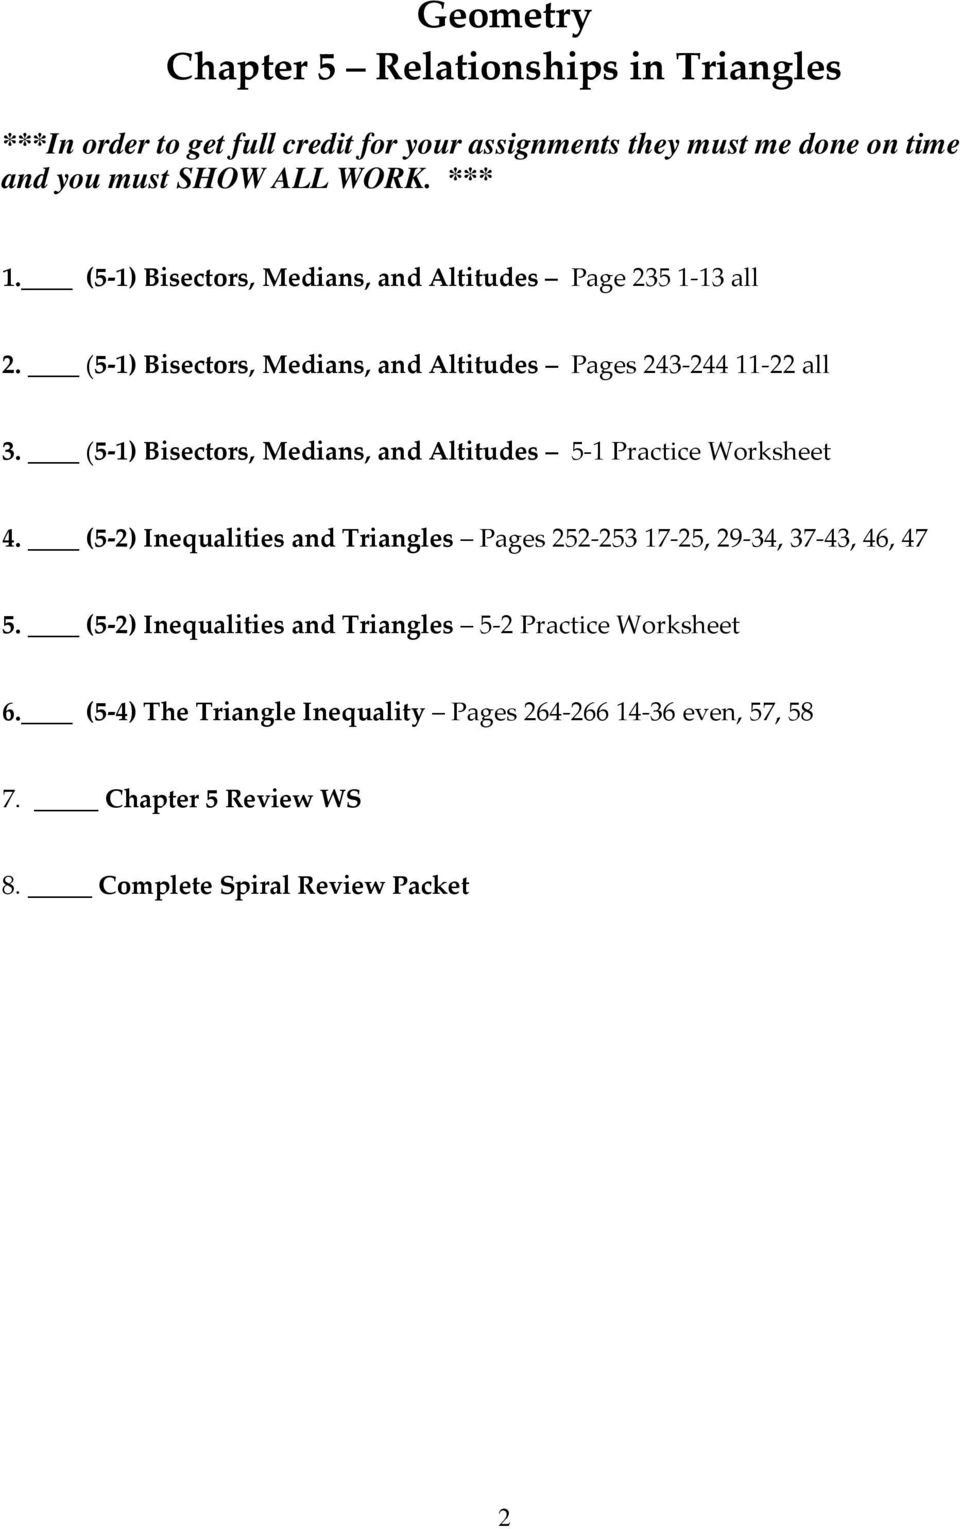 Centers Of Triangles Worksheet Geometry Relationships In Triangles Unit 5 Name Pdf